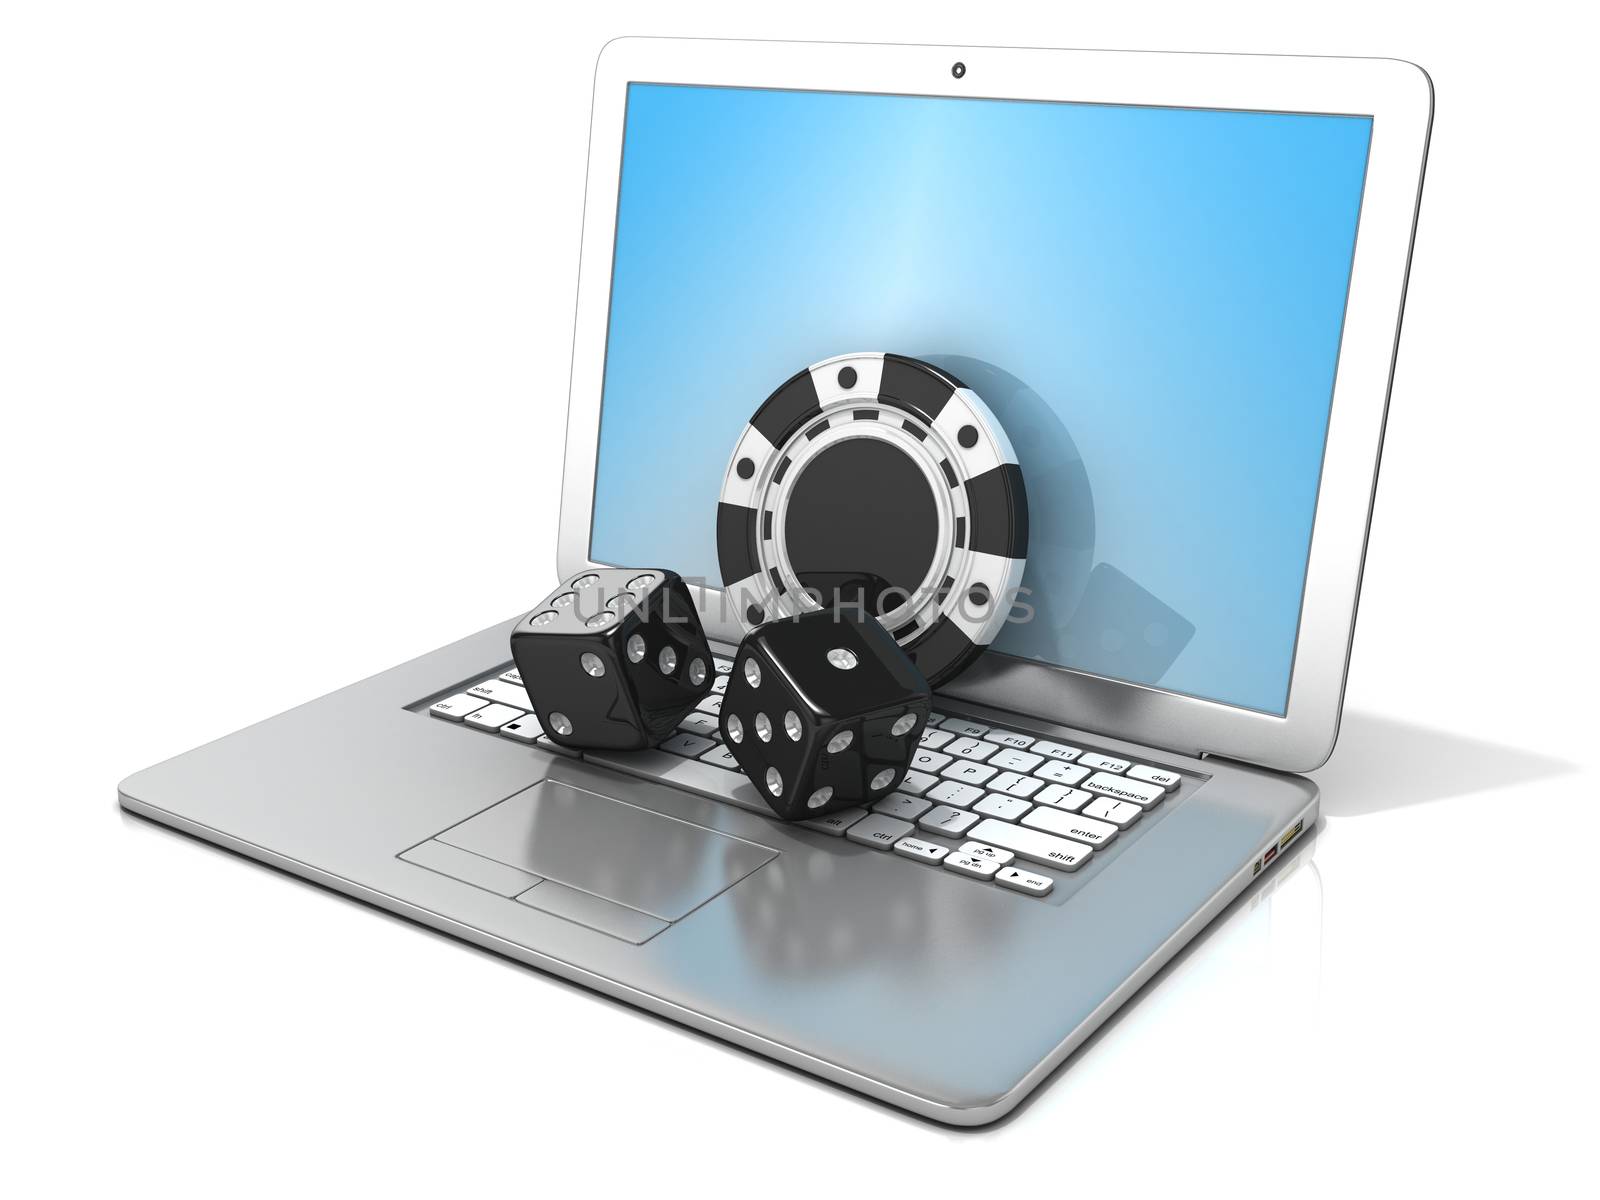 Laptop with black dice and chip. 3D rendering - concept of online gambling. Isolated on white background